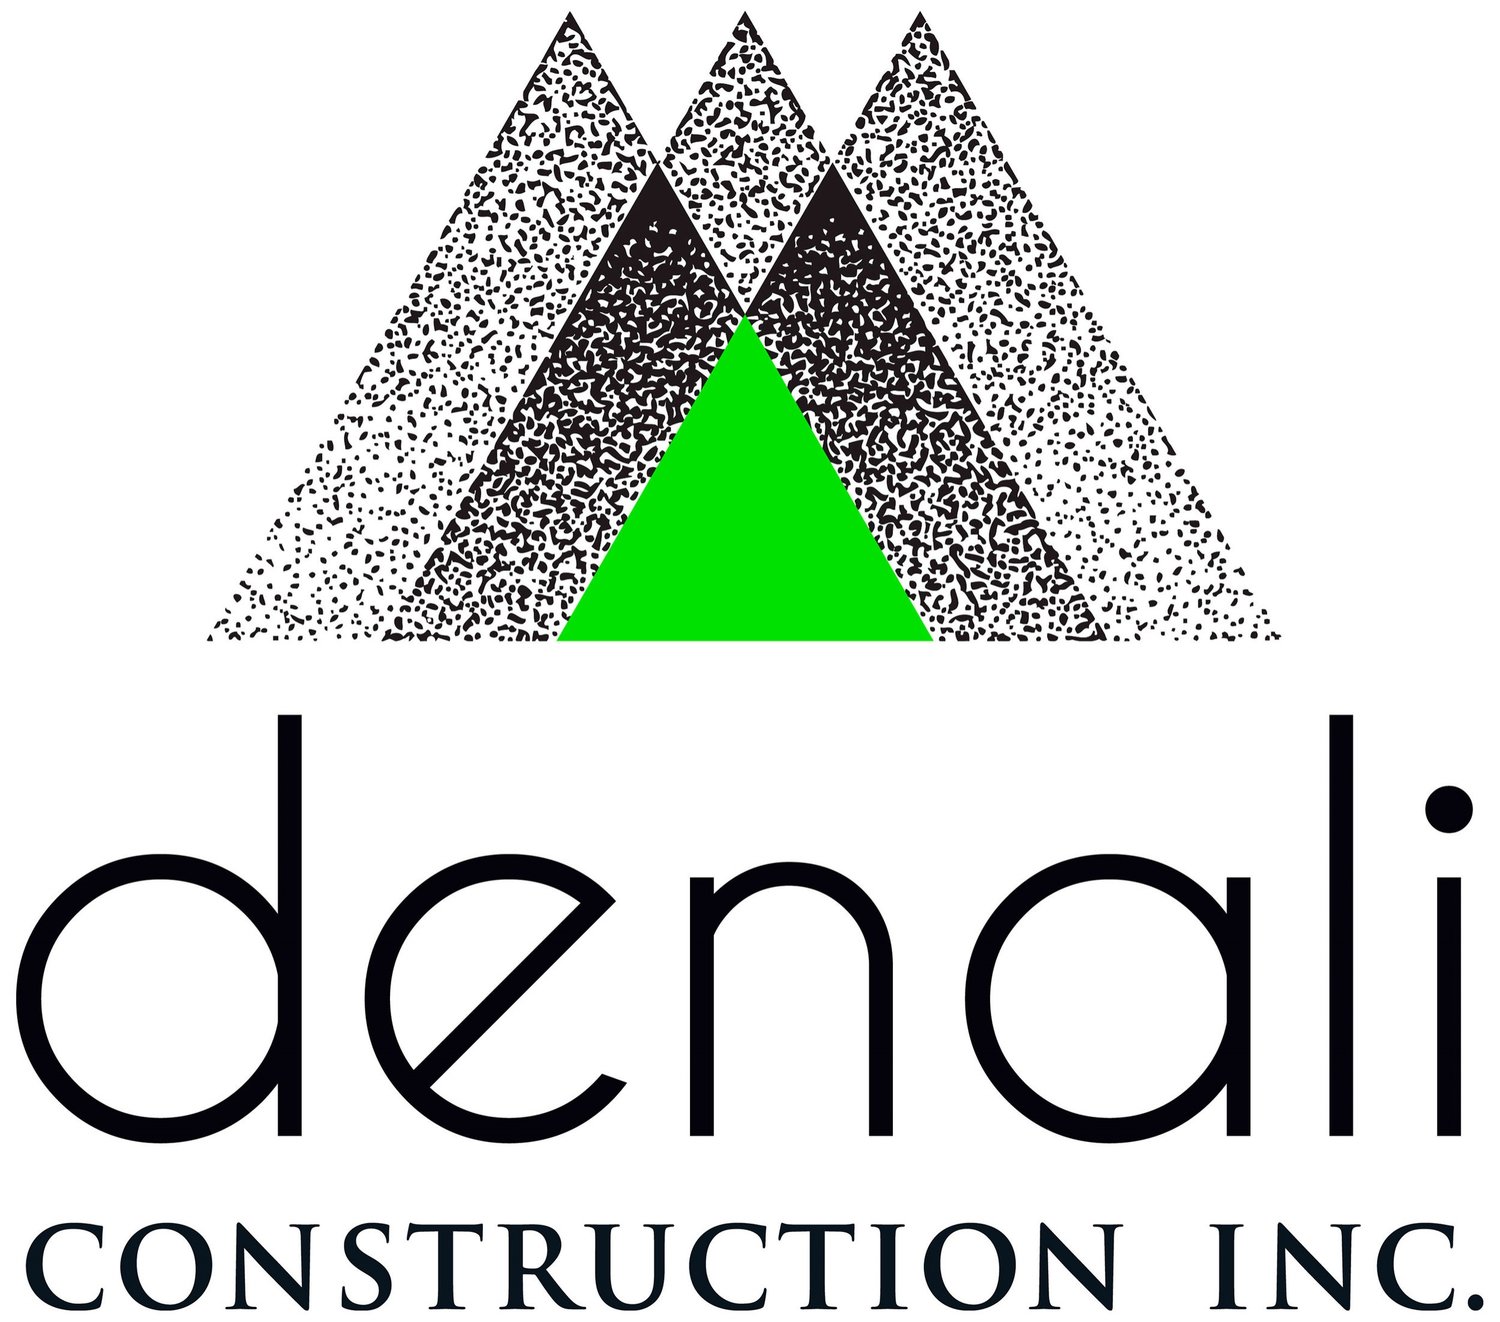 DENALI CONSTRUCTION, INC. [] Oregon's superior residential & commercial construction/remodeling company